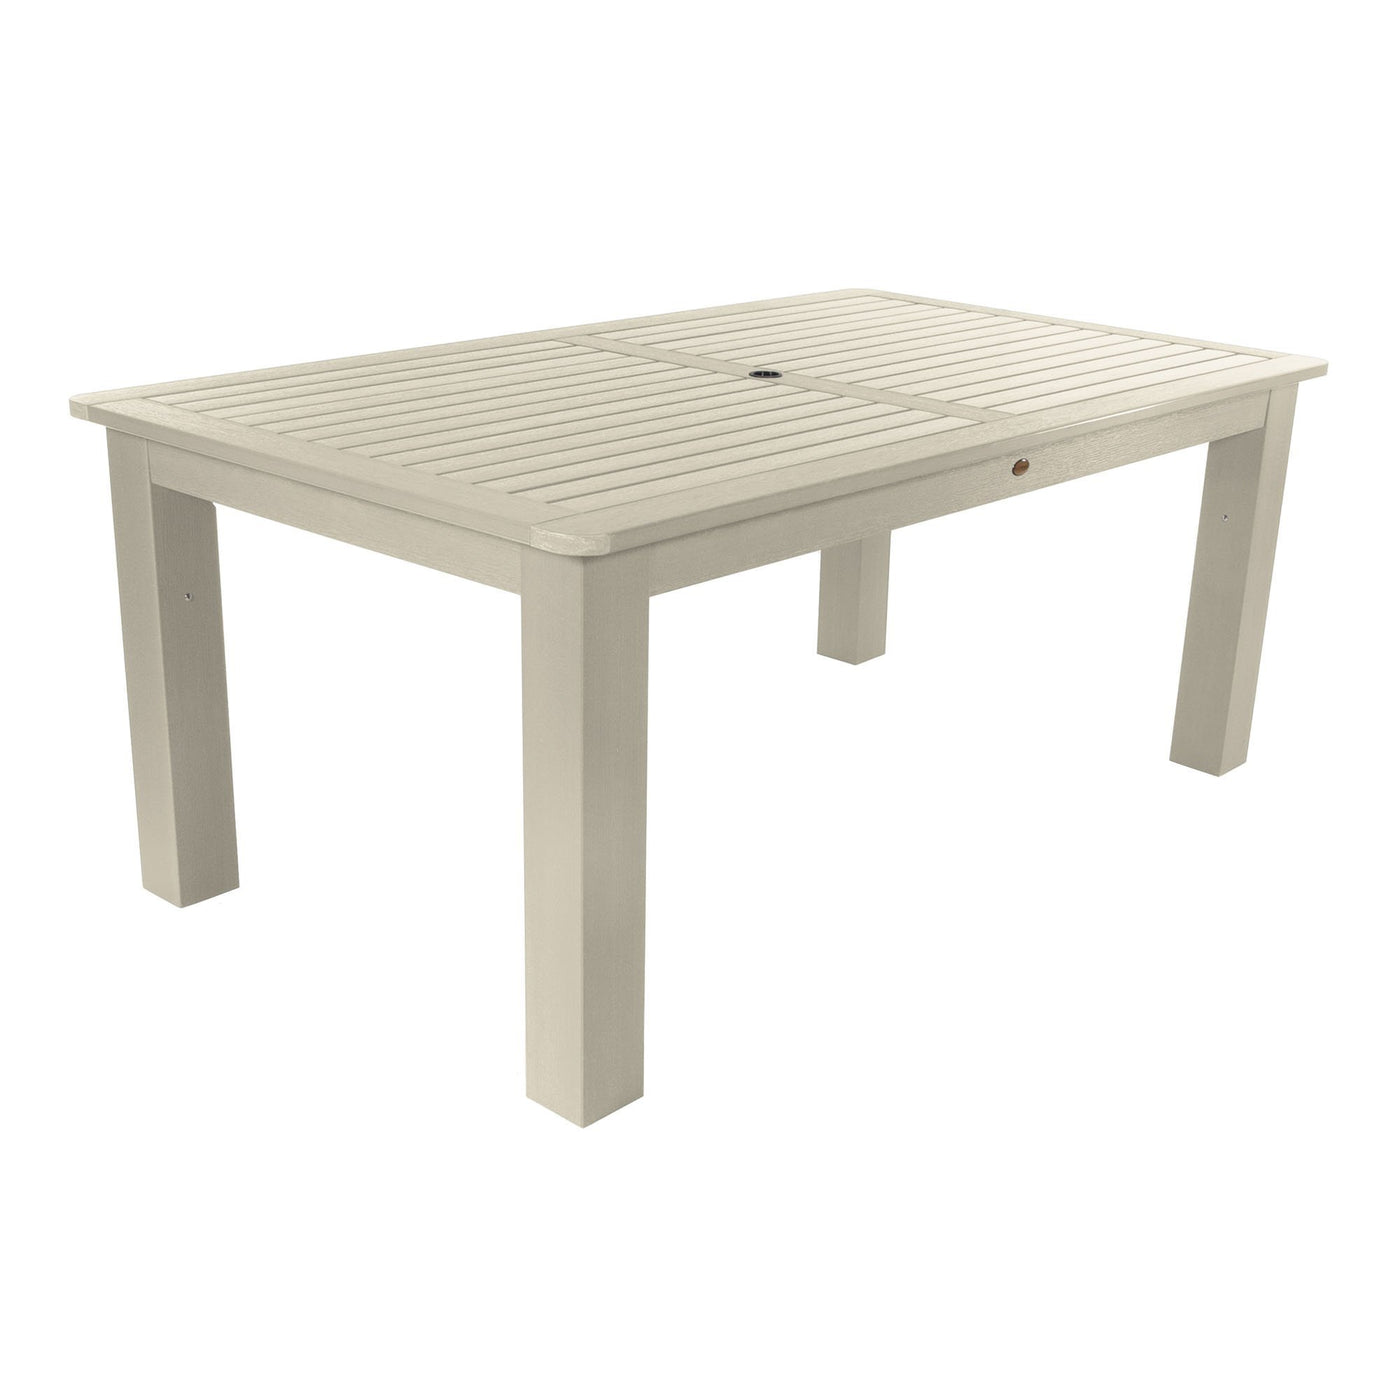 Rectangular 42in x 72in Outdoor Dining Table - Dining Height Dining Highwood USA Whitewash 